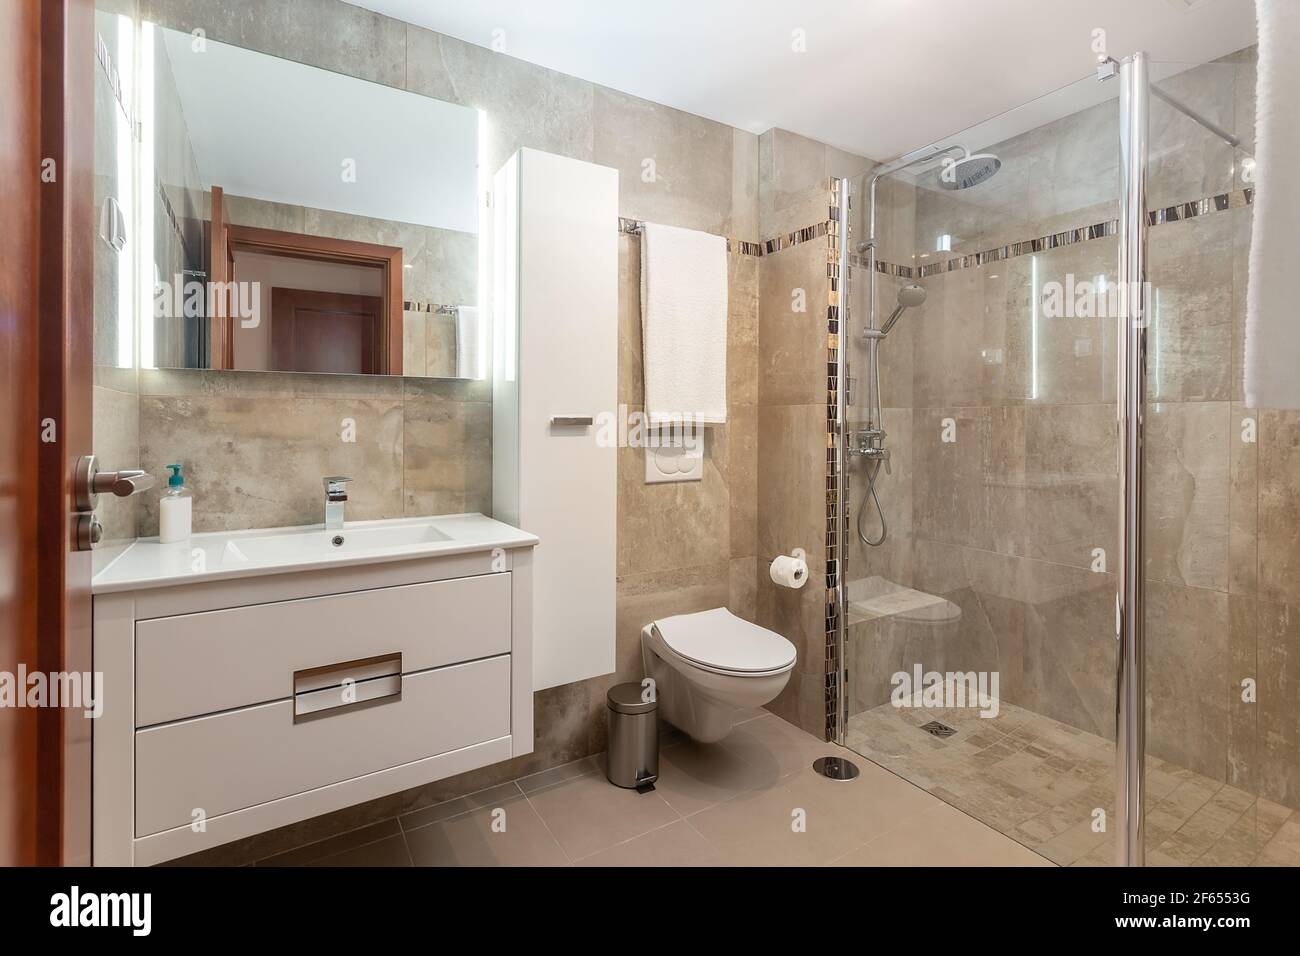 Beige colored bathroom interior, a shower with a glass door and a ceramic toilet, also a few towels on the walls. Stock Photo